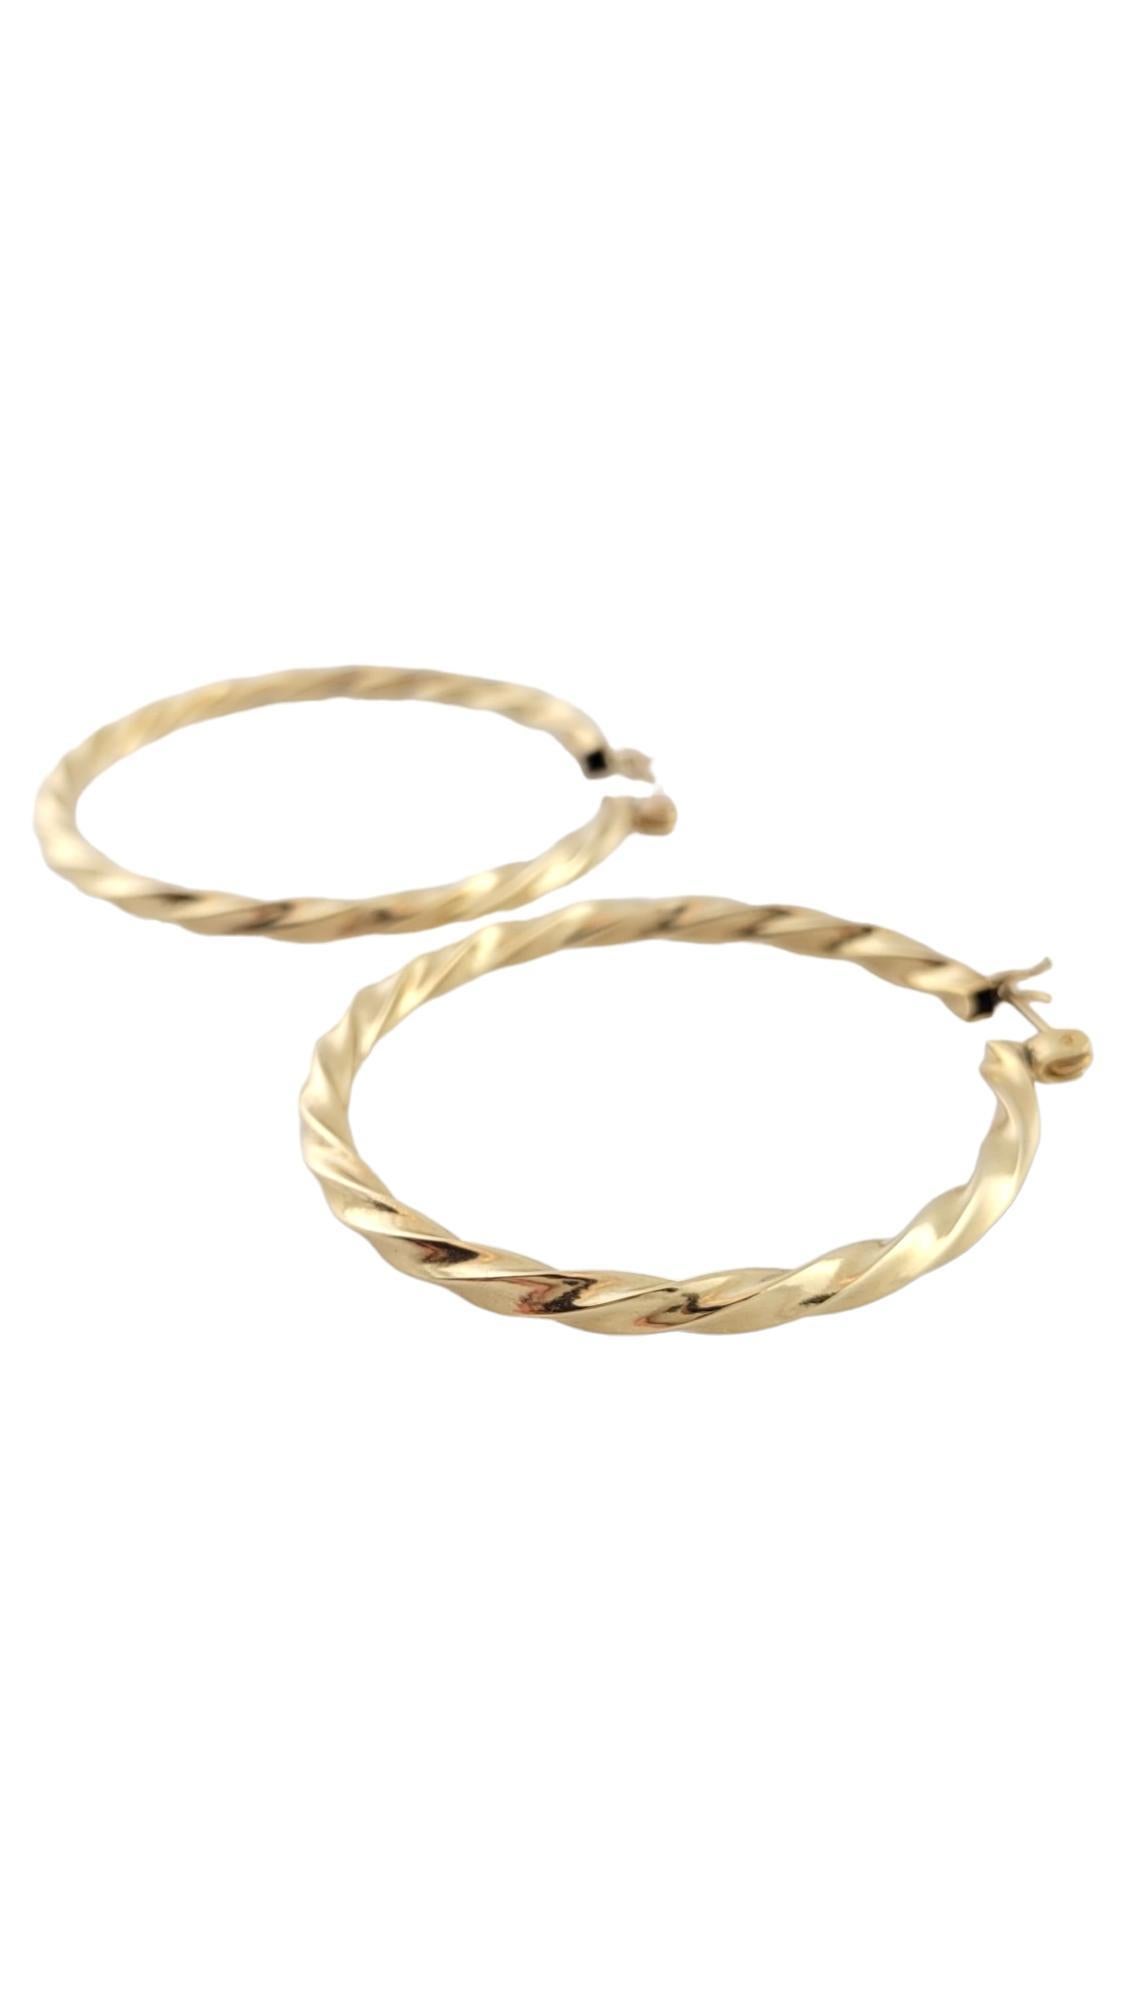 14K Yellow Gold Twisted Hoop Earrings #16191 In Good Condition For Sale In Washington Depot, CT